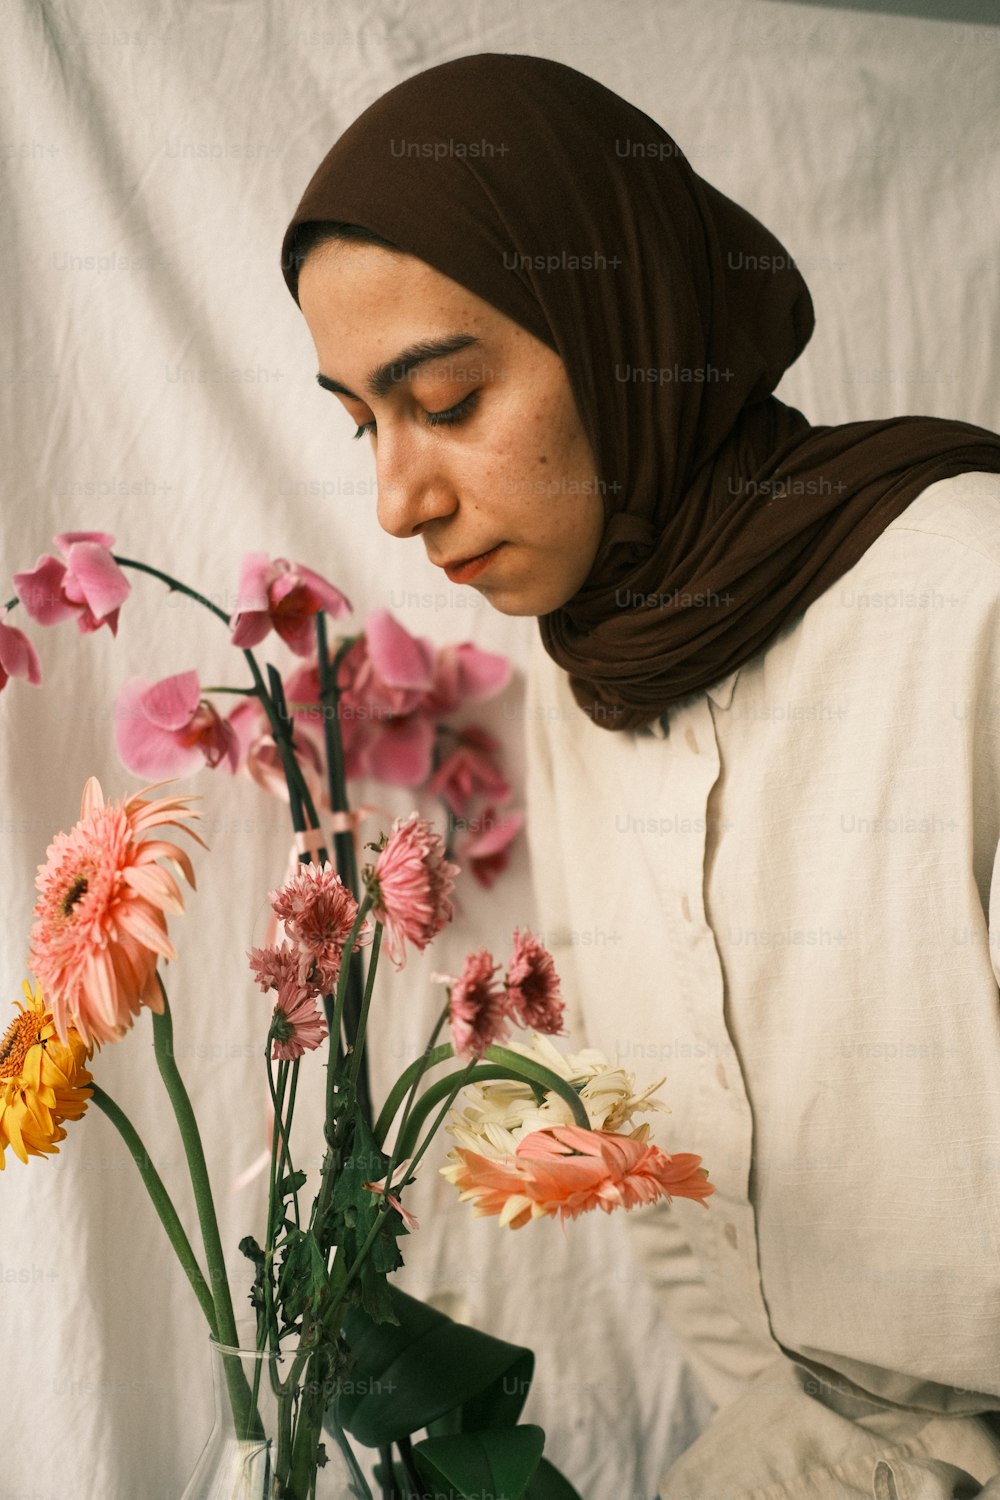 a woman in a headscarf arranging flowers in a vase